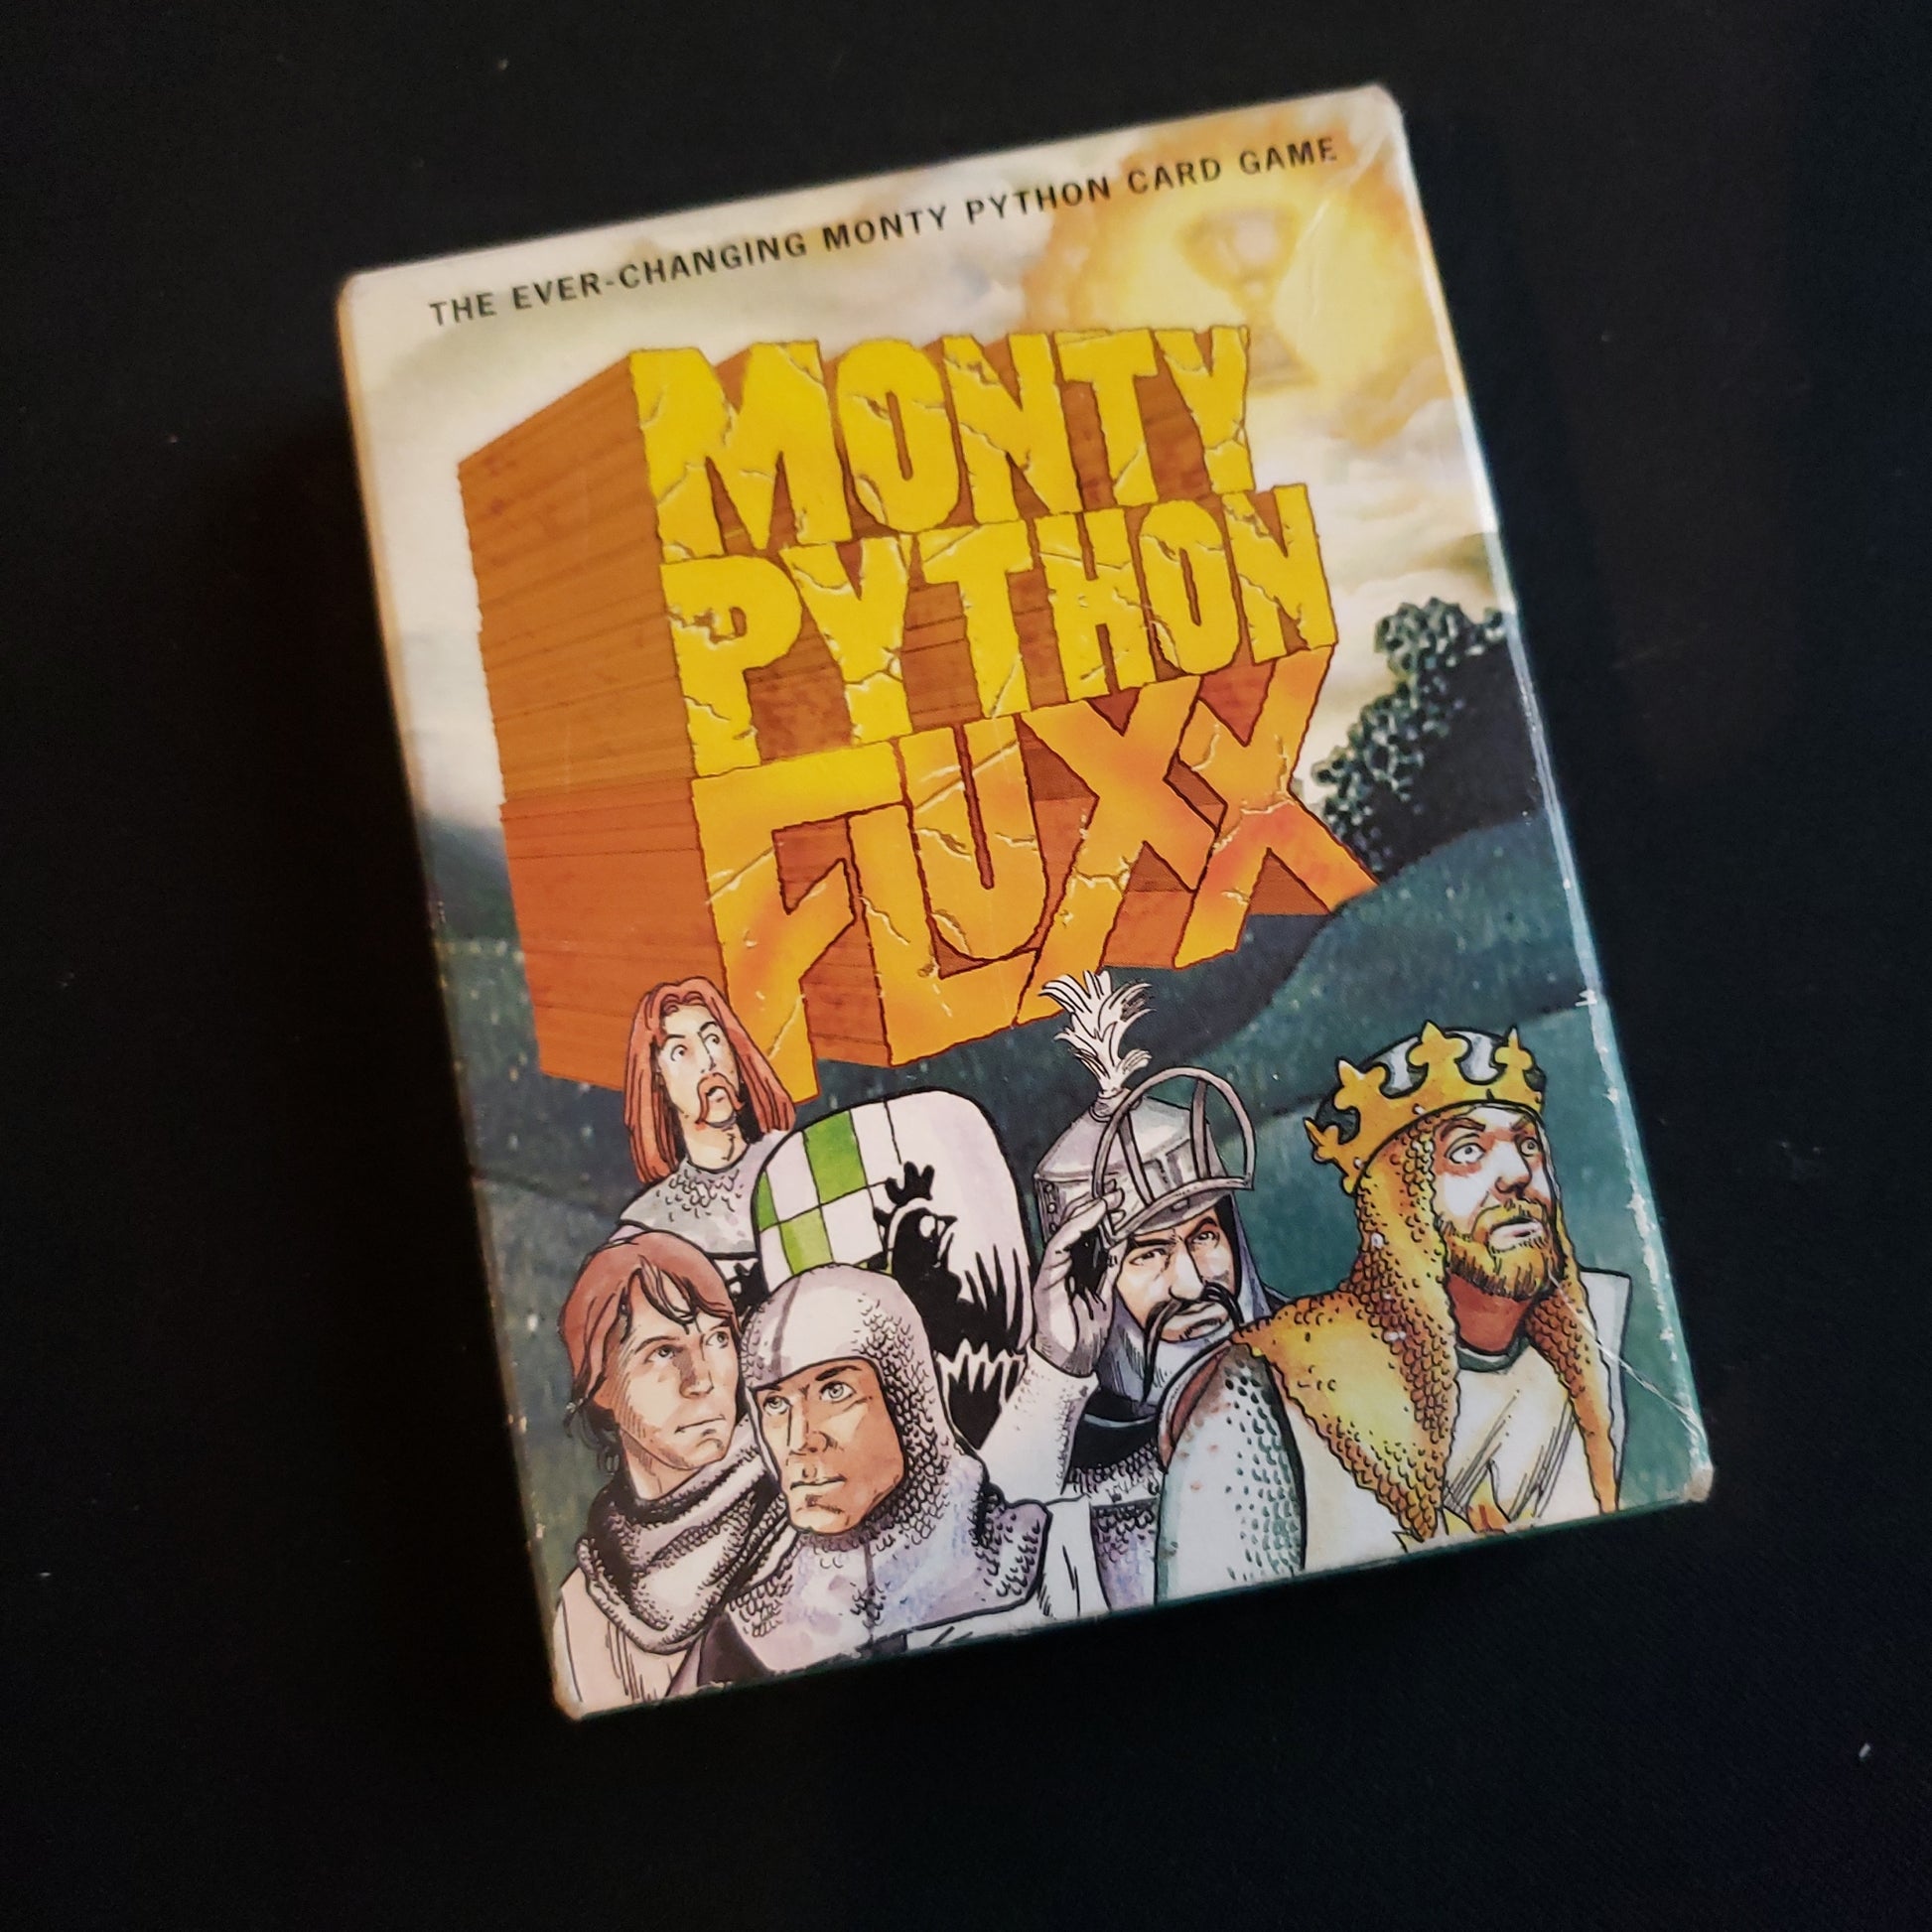 Image shows the front cover of the box of the Monty Python Fluxx card game